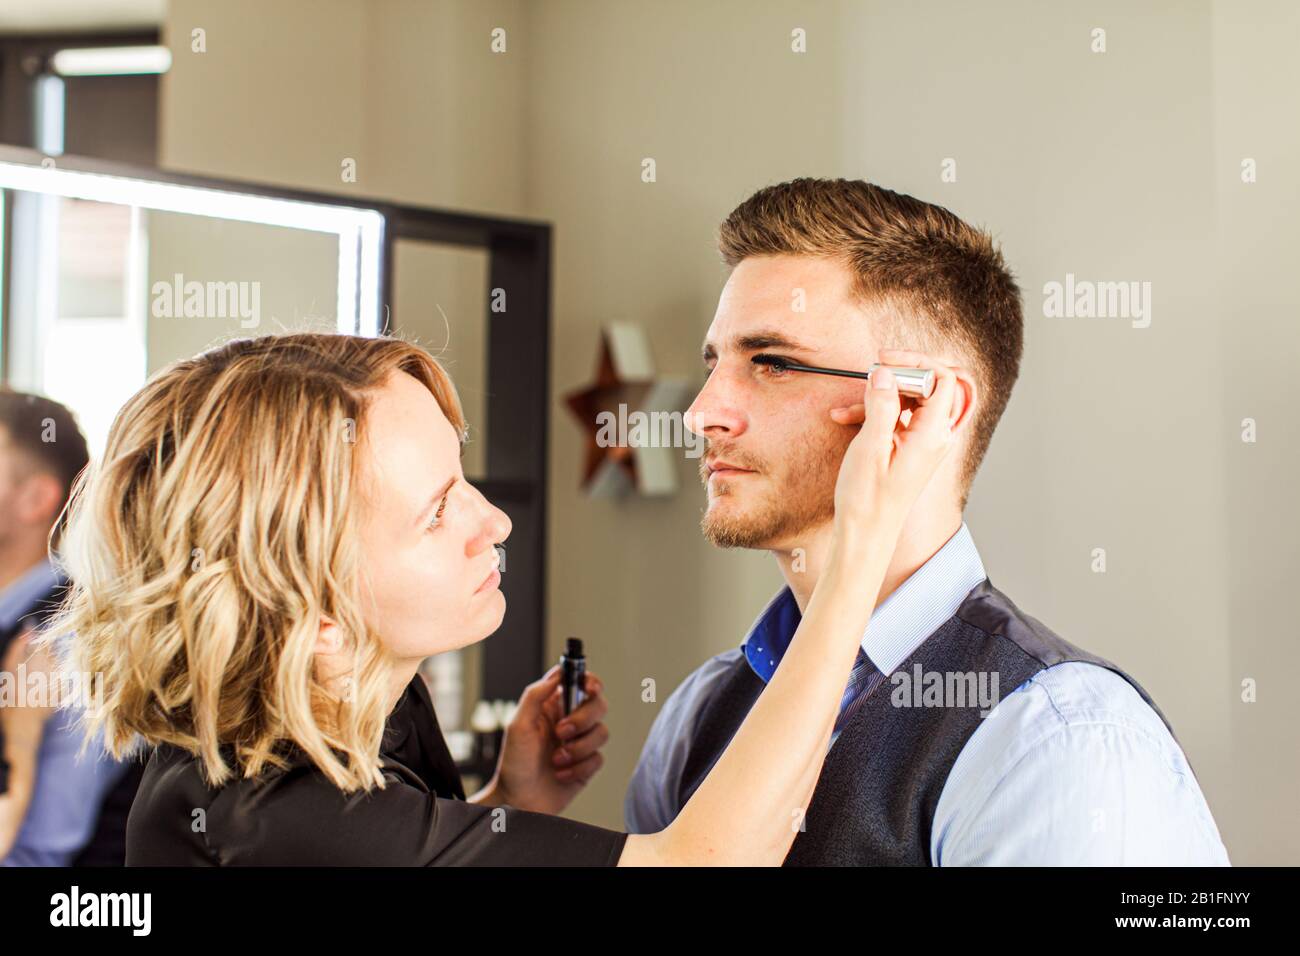 Professional actor preparation before shoot. Handsome young man applying by professional make up of visagist. Stock Photo